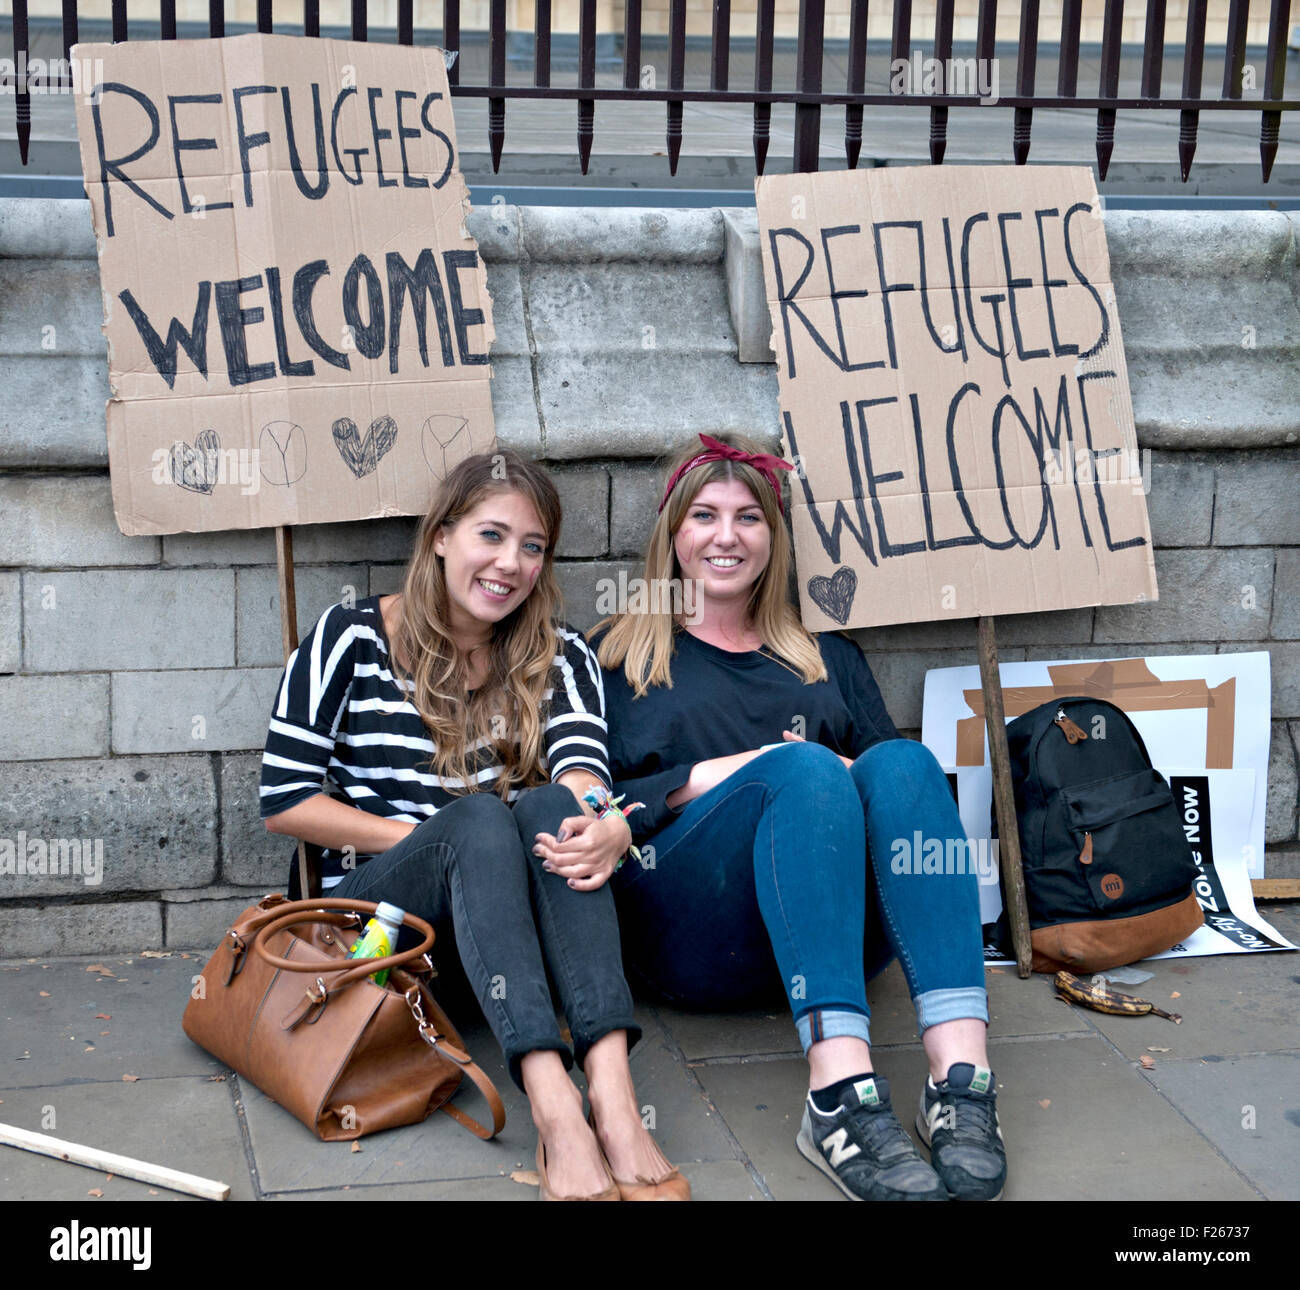 Refugees Welcome! :: Wykop.pl